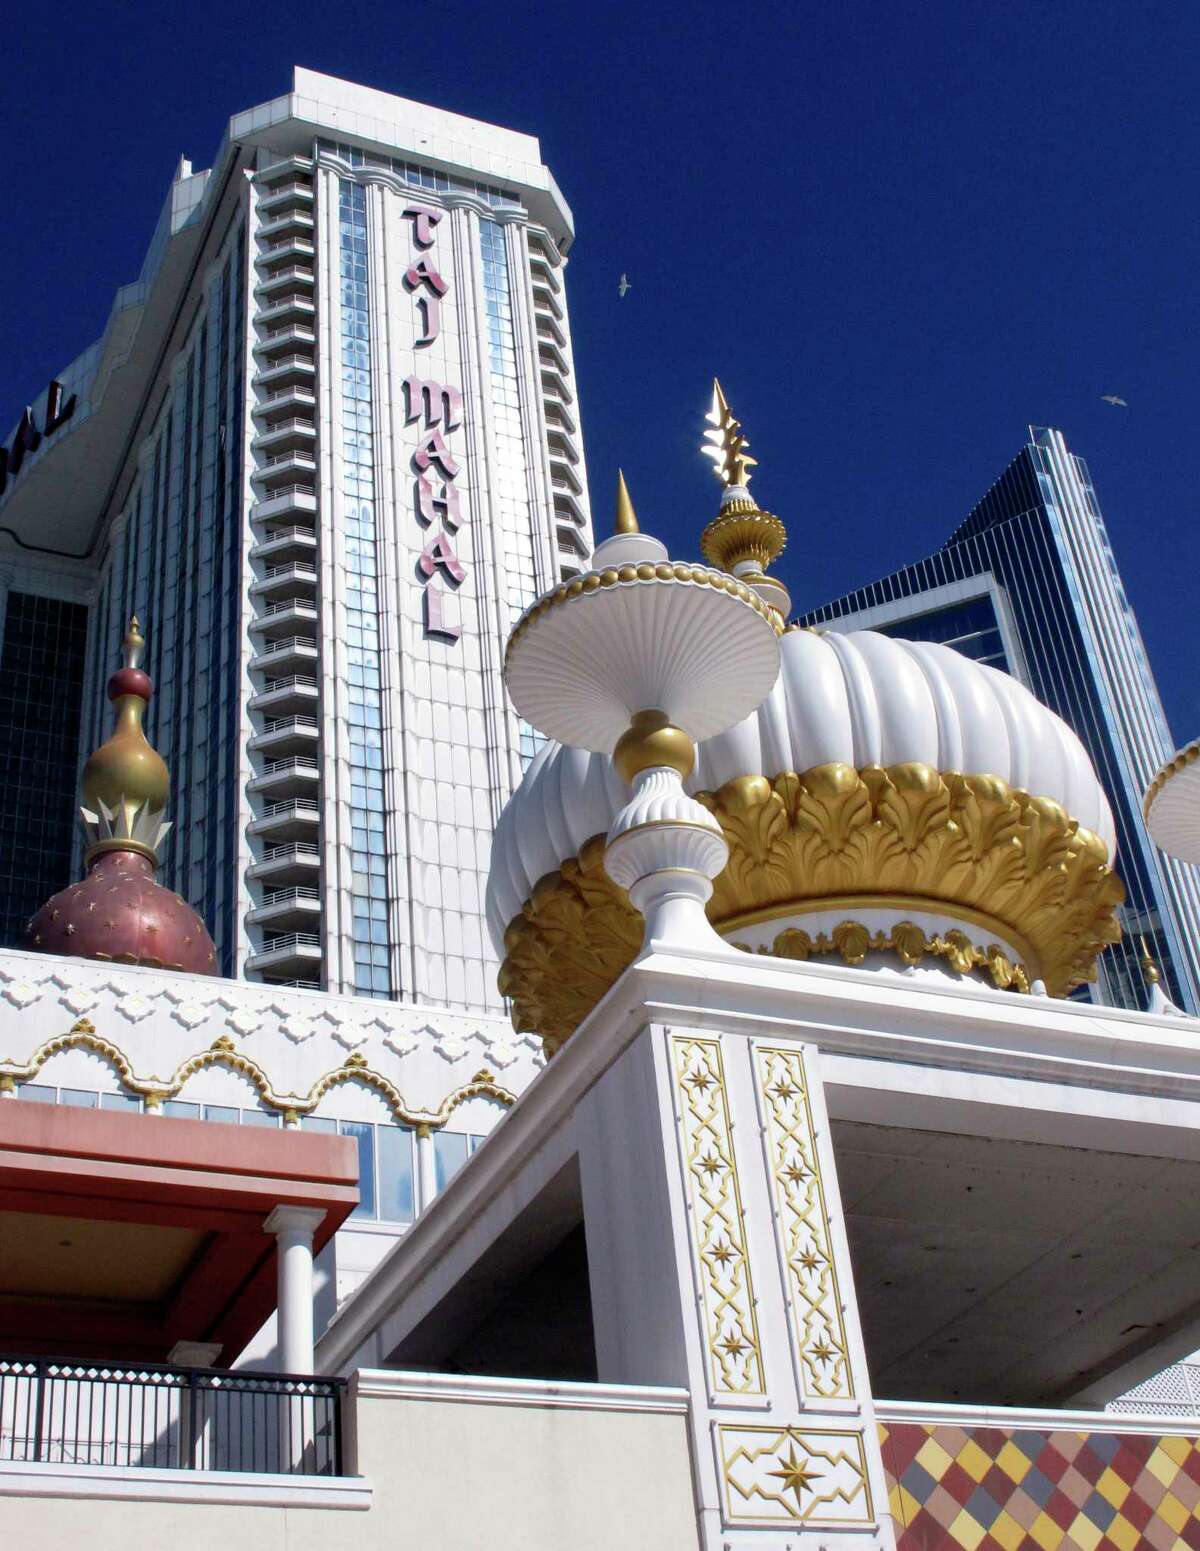 Hard Rock, the gambling arm of the Seminole tribe of Florida, is working on a remake of the former Trump Taj Mahal casino in Atlantic City.